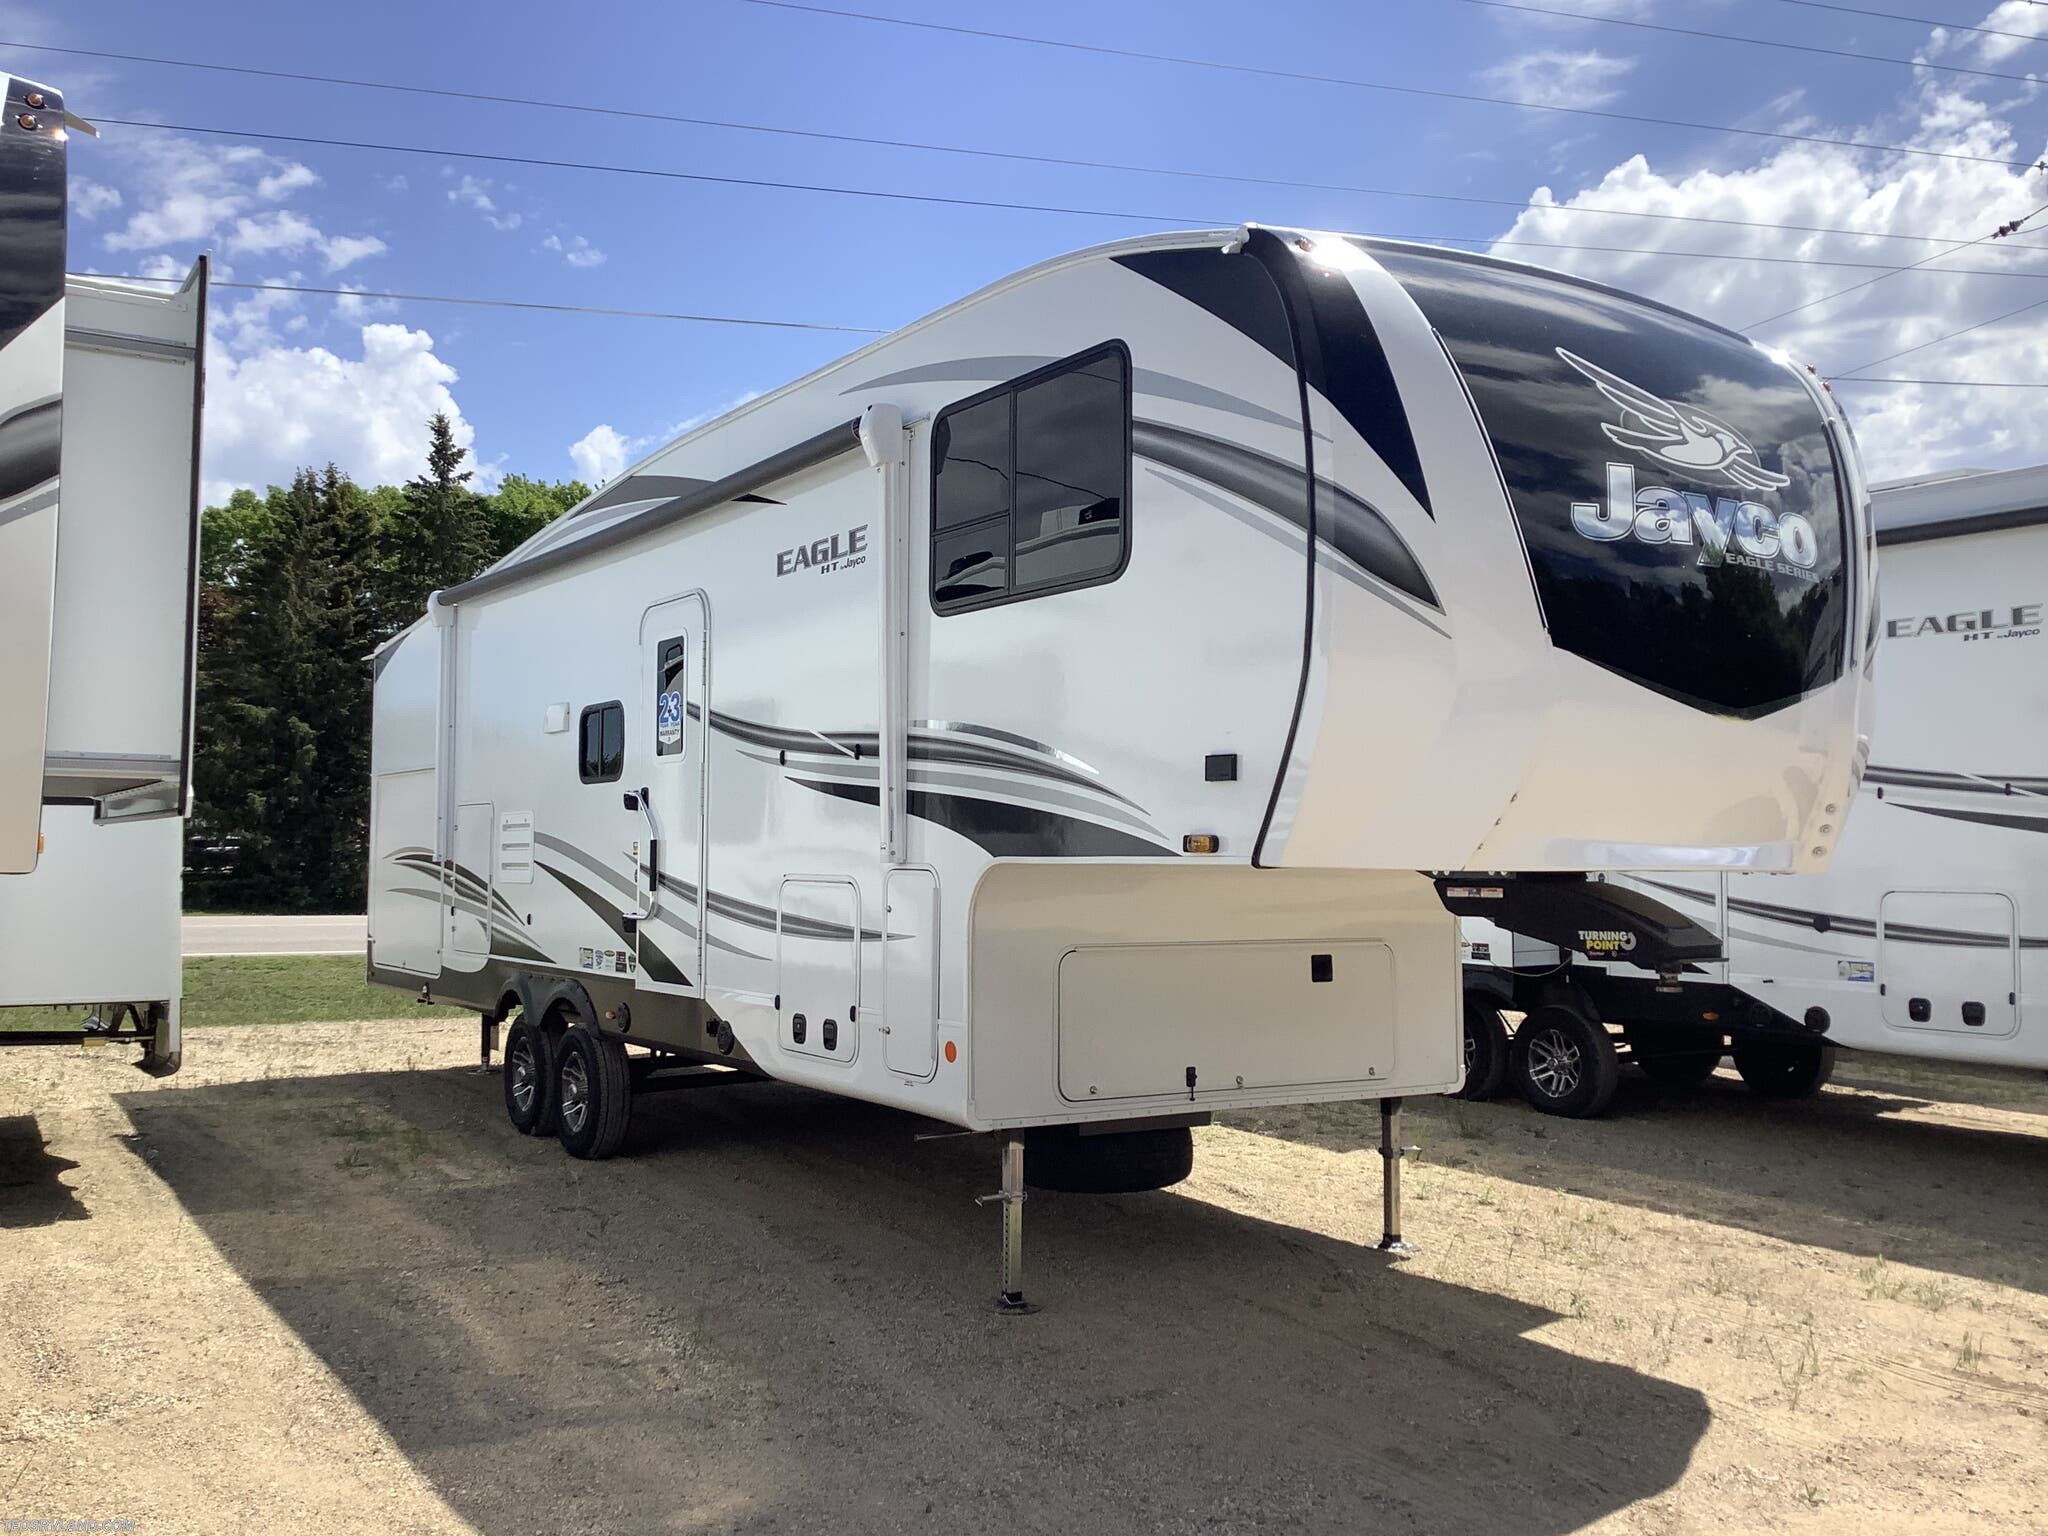 2022 Jayco Eagle HT 29.5BHDS RV for Sale in Paynesville, MN 56362 on